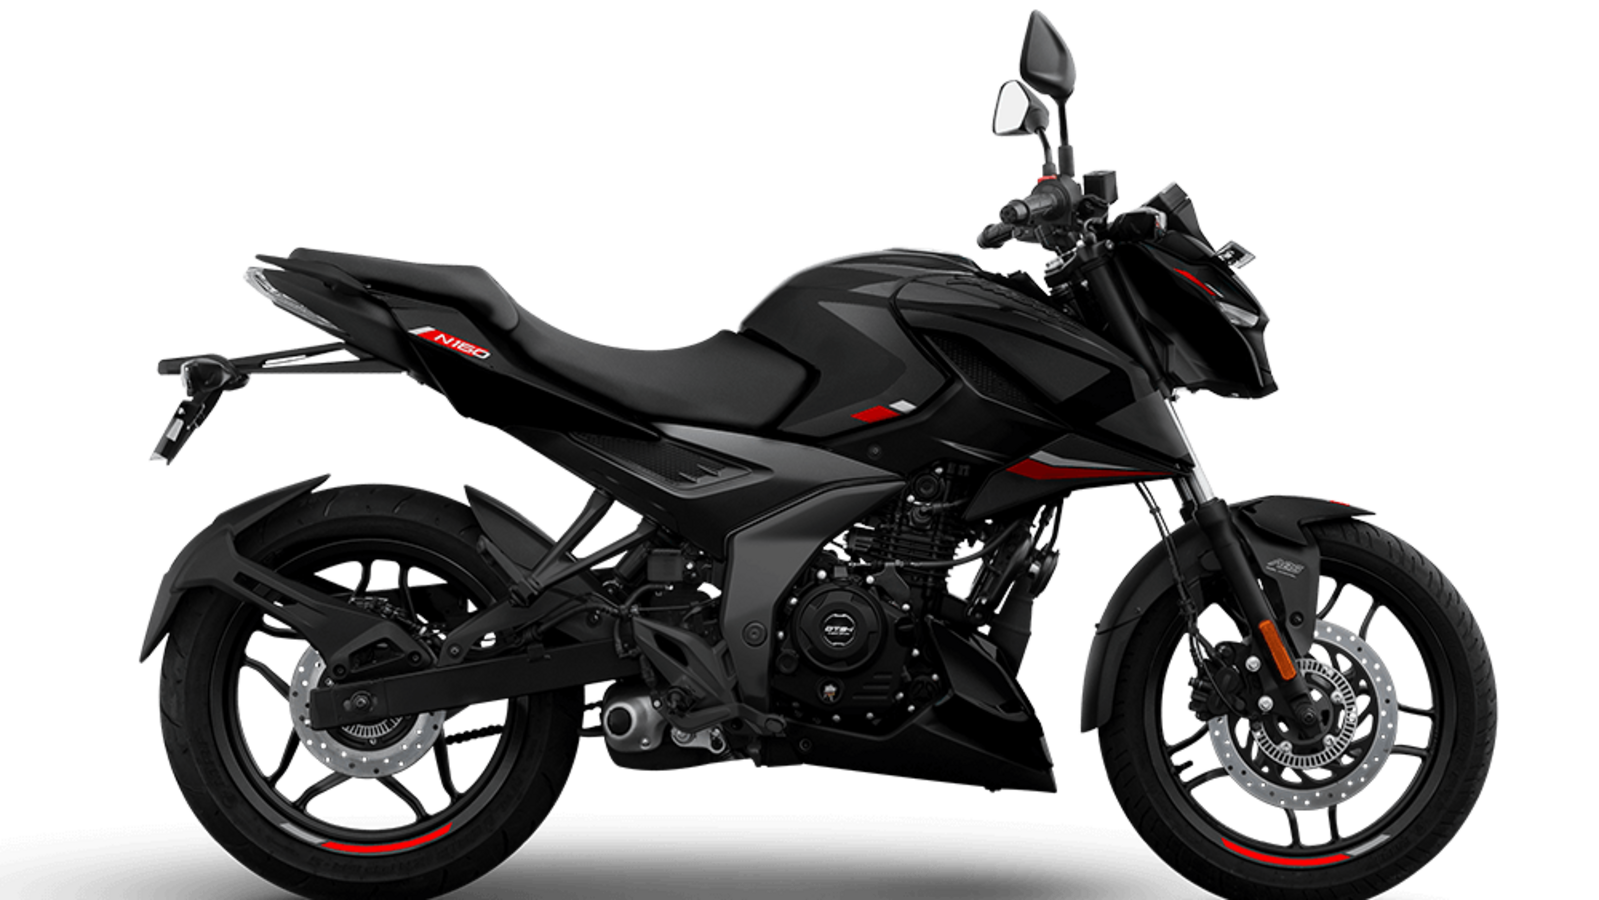 Bajaj Pulsar N150 to launch soon in the Indian market: What to expect?